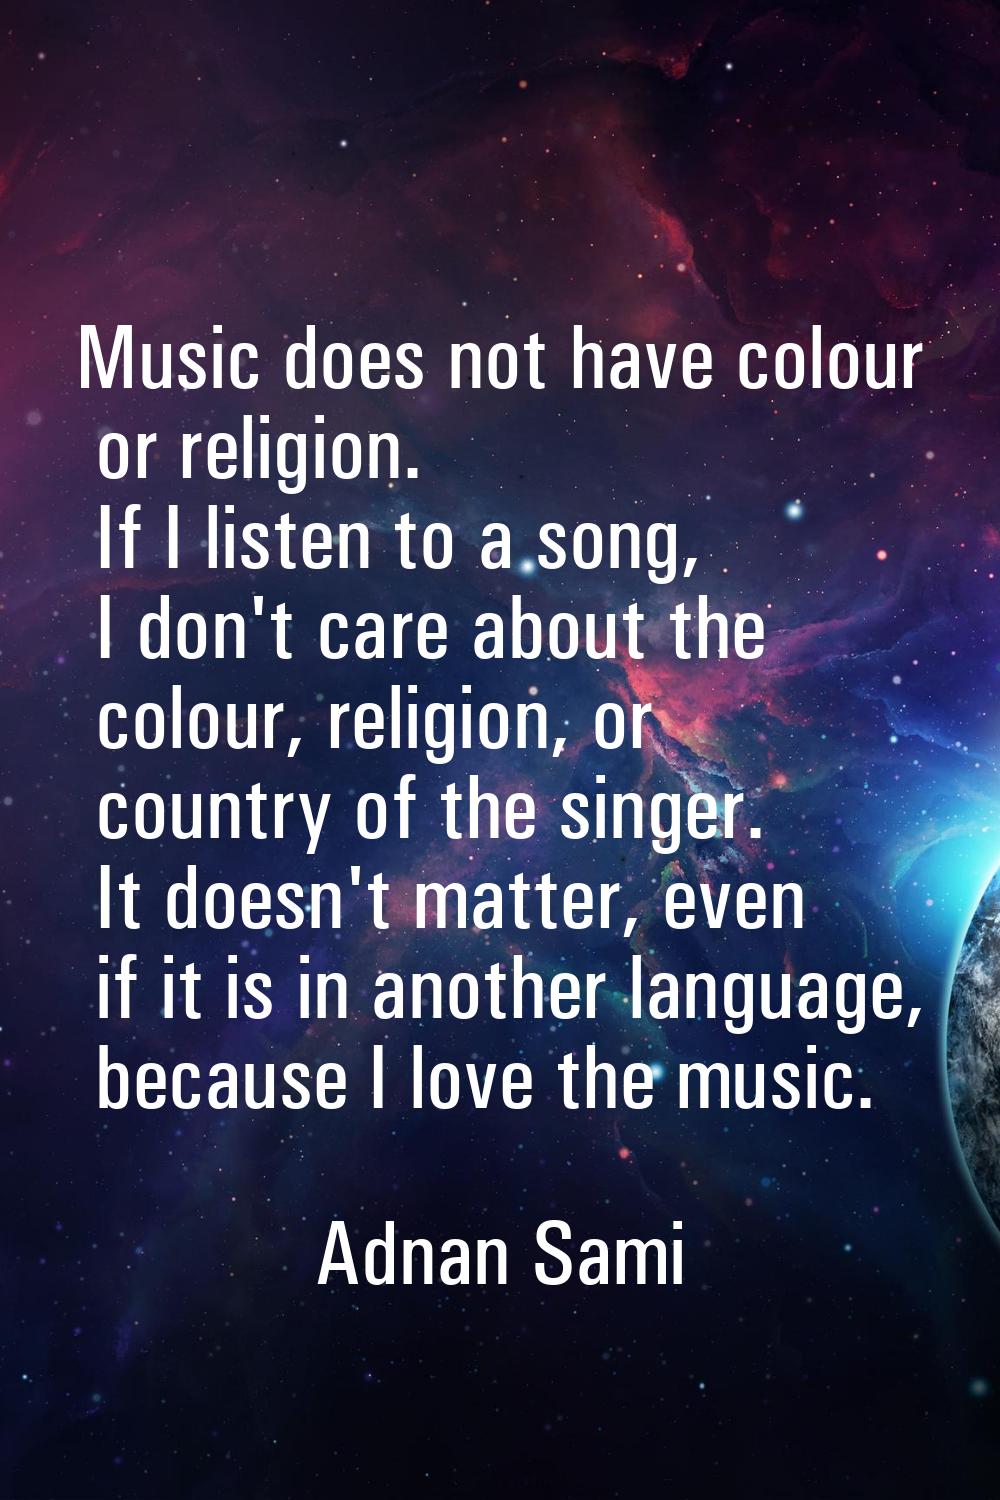 Music does not have colour or religion. If I listen to a song, I don't care about the colour, relig